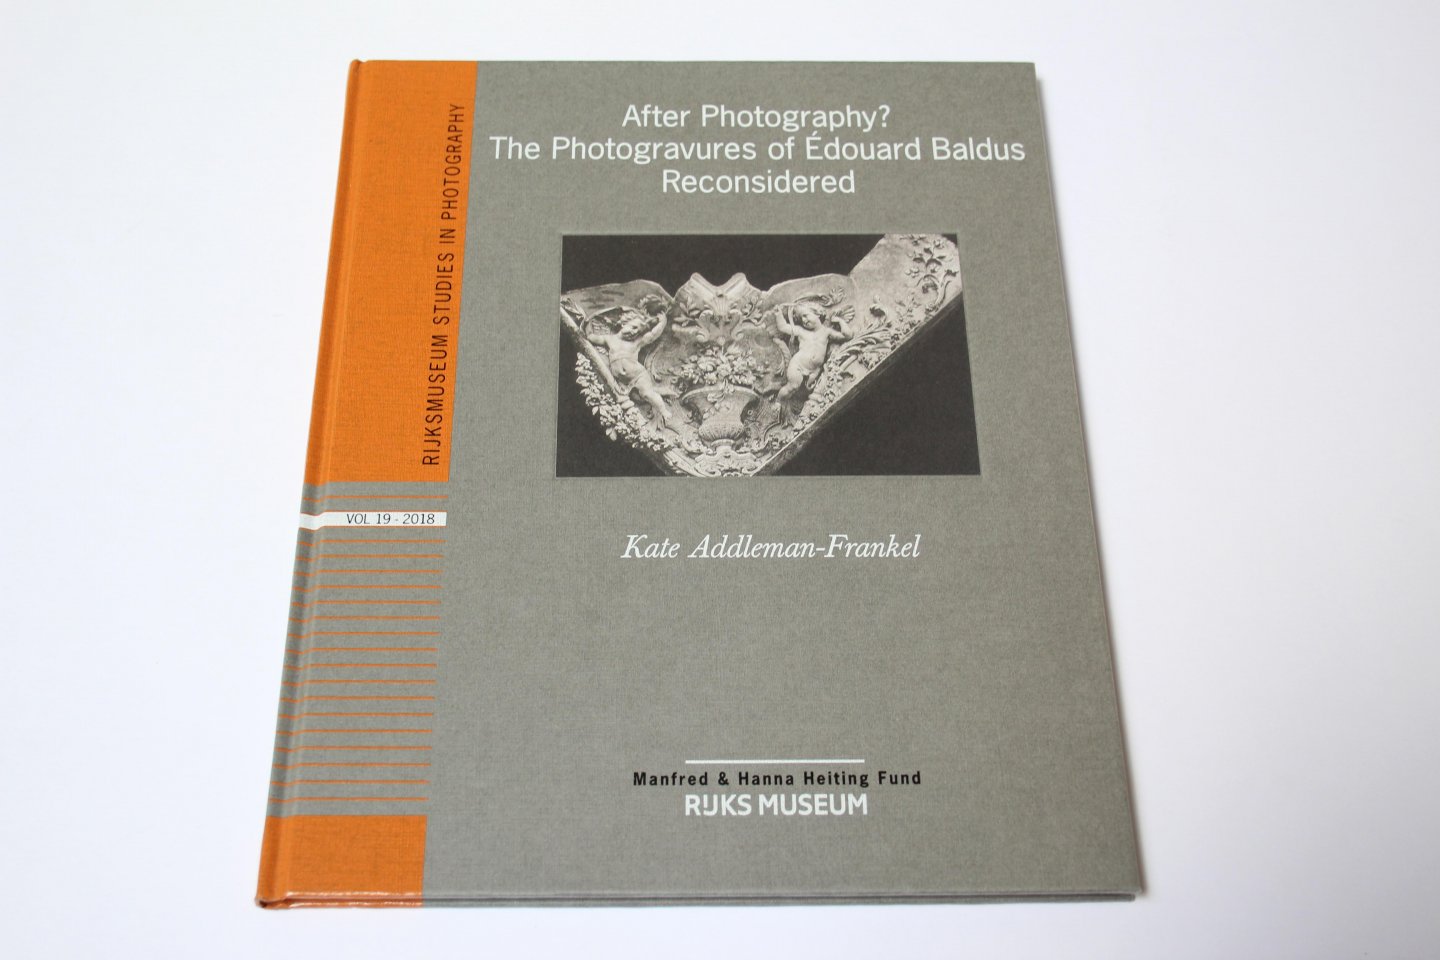 Kate Addleman-Frankel - Rijksmuseum studies in photography 19 / After photography? the photogravures of Edouard Baldus reconsidered